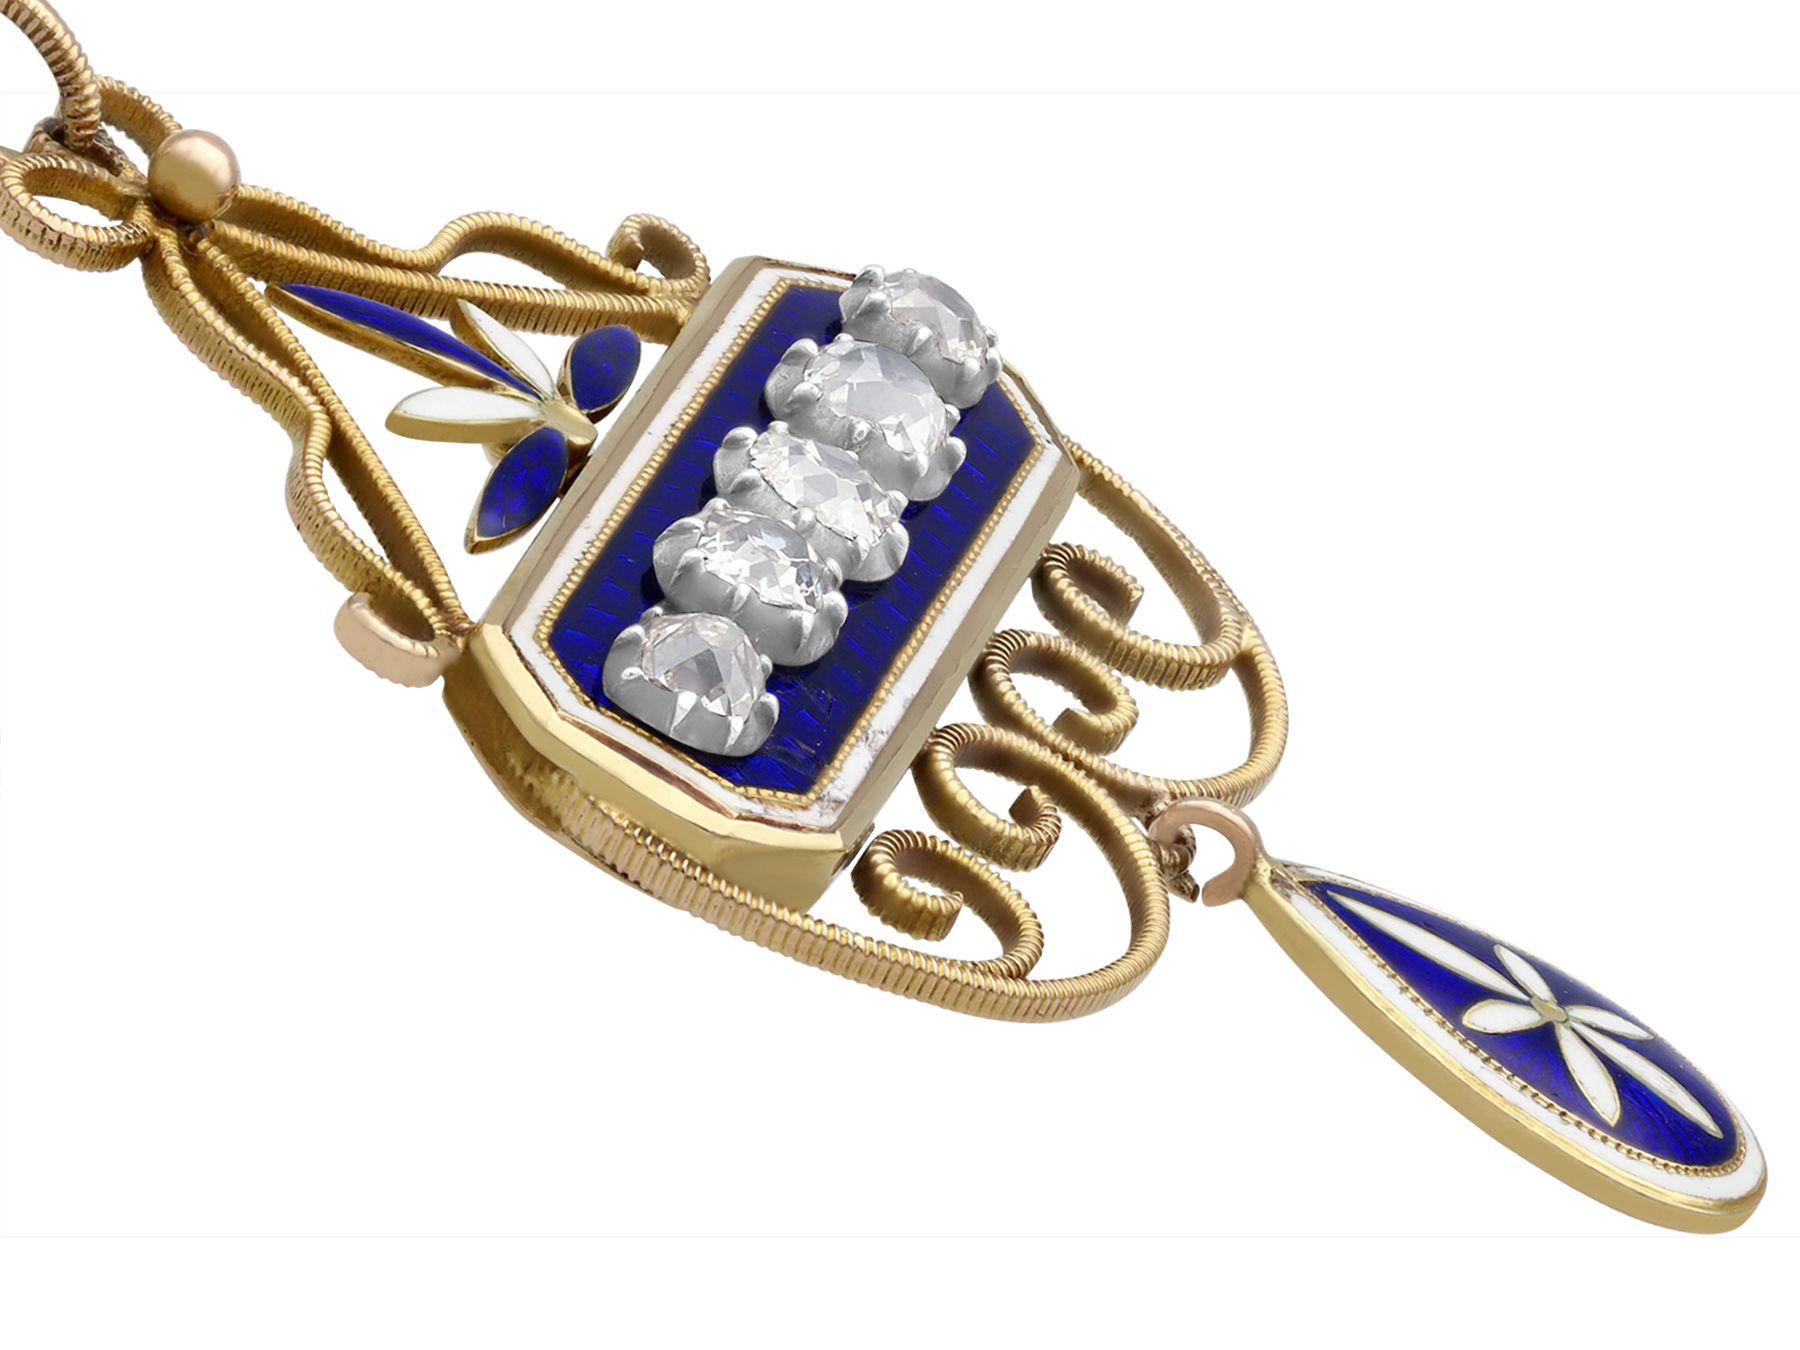 Antique 1.89 Carat Diamond and Enamel Yellow Gold and Silver Pendant For Sale 1